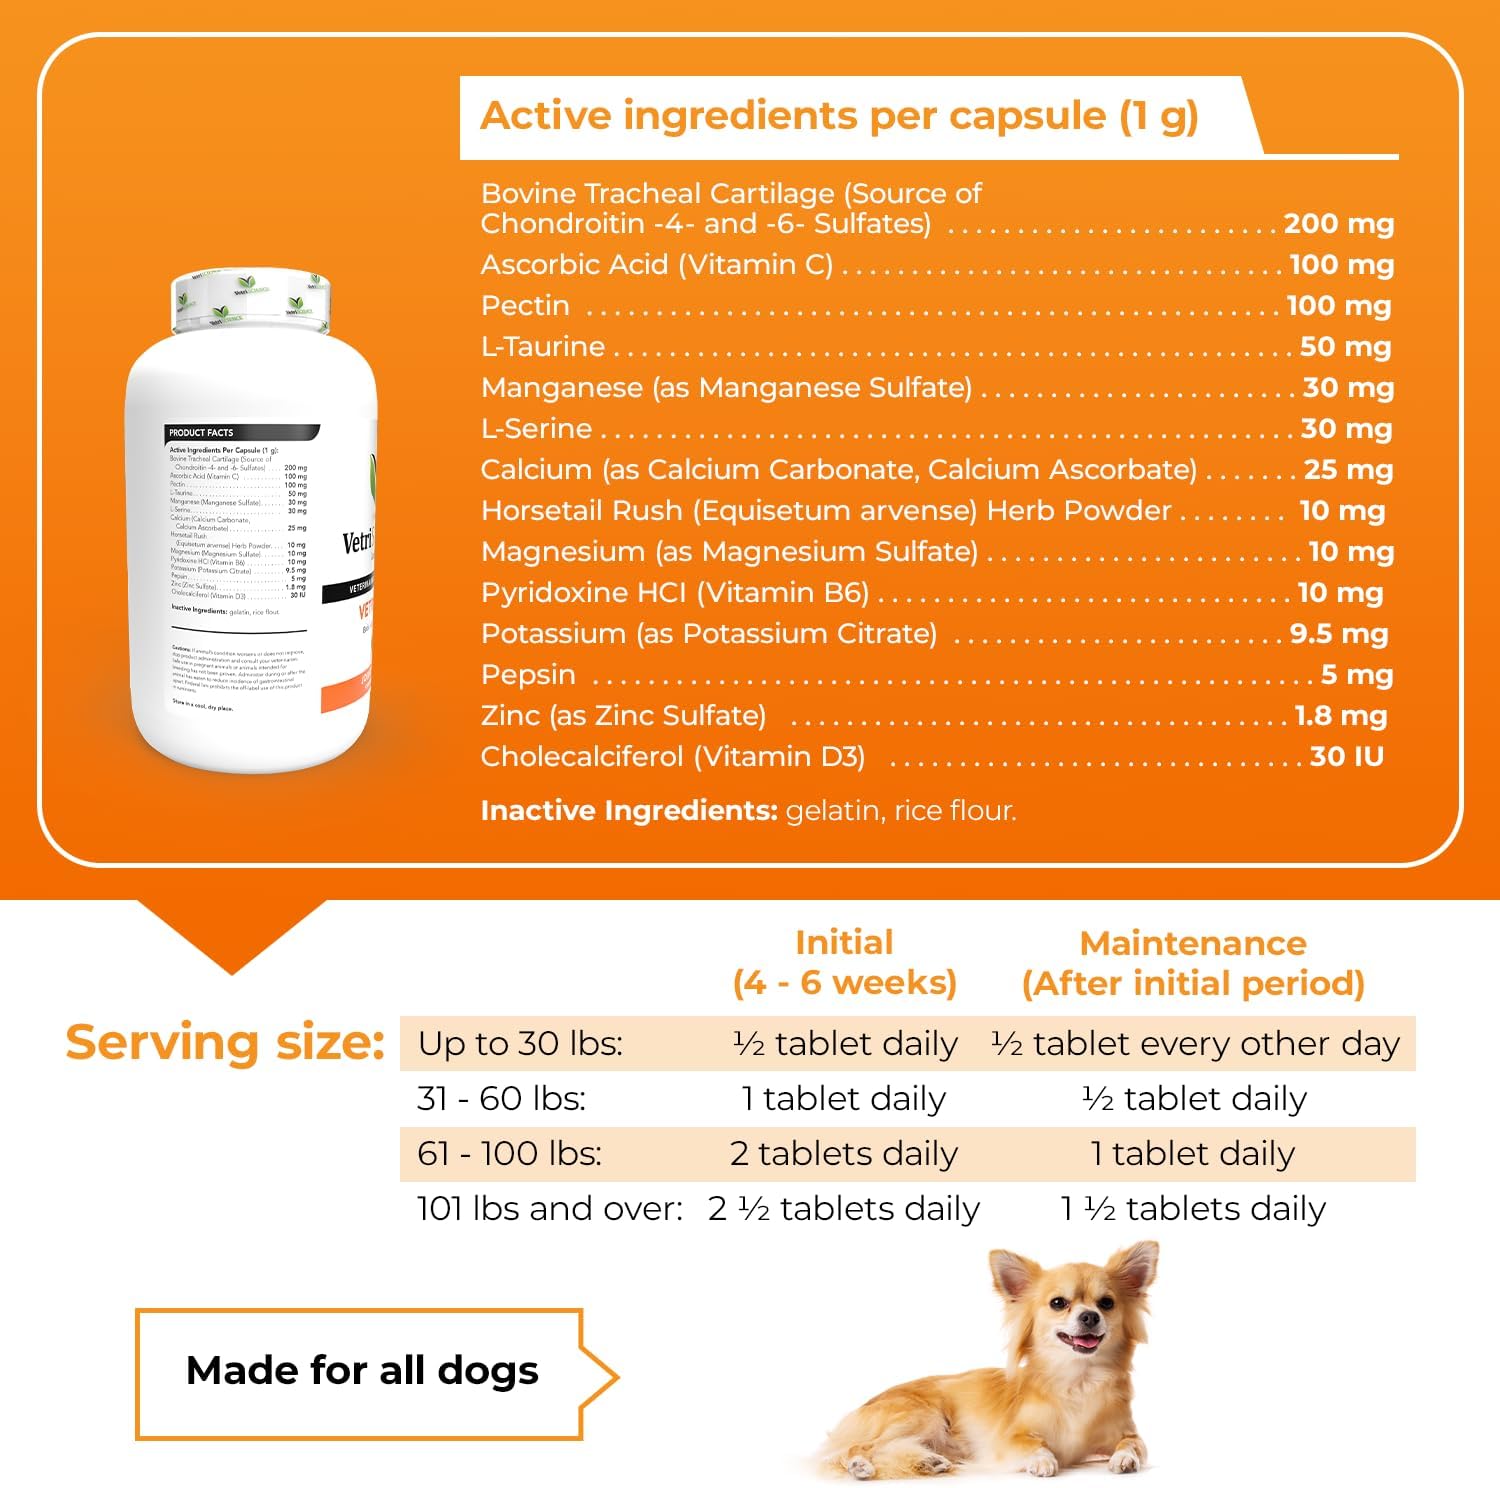 VetriScience Vetri Disc Joint Supplement for Dogs - Spine Support & Joint Health Dog Supplement with Chondroitin Sulfate, Vitamins B6, C & D, Calcium, Magnesium, Horsetail Herb & More - 180 Capsules? : Pet Bone And Joint Supplements : Pet Supplies